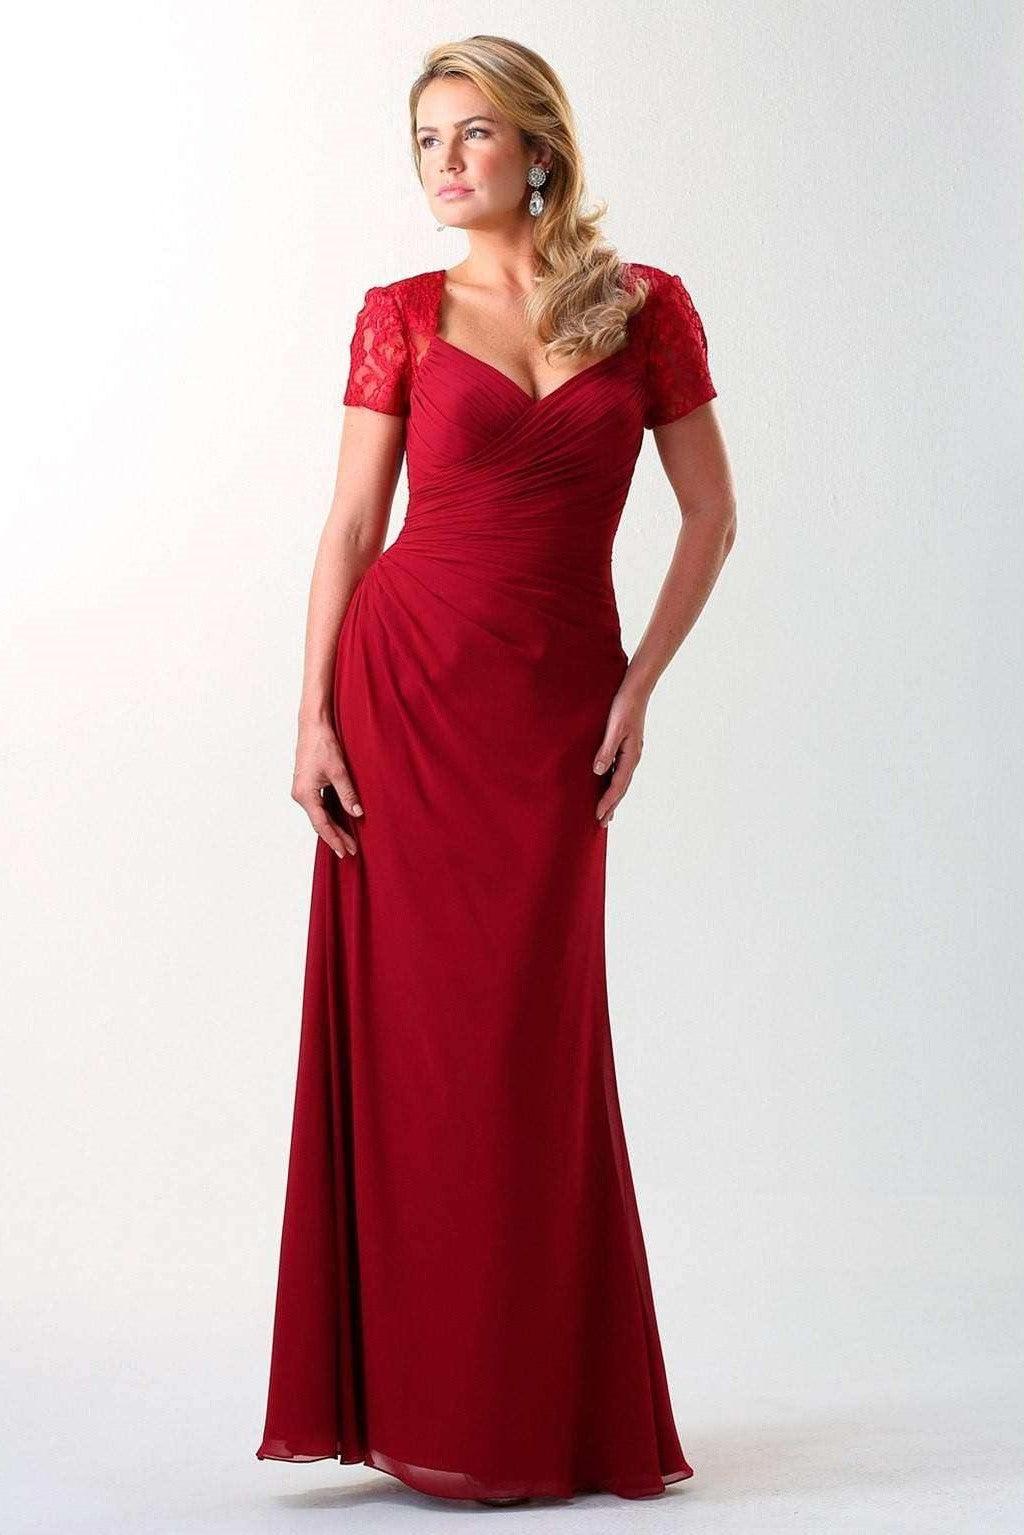 REBECCA 30% OFF WAS £215 NOW - Adore Bridal and Occasion Wear